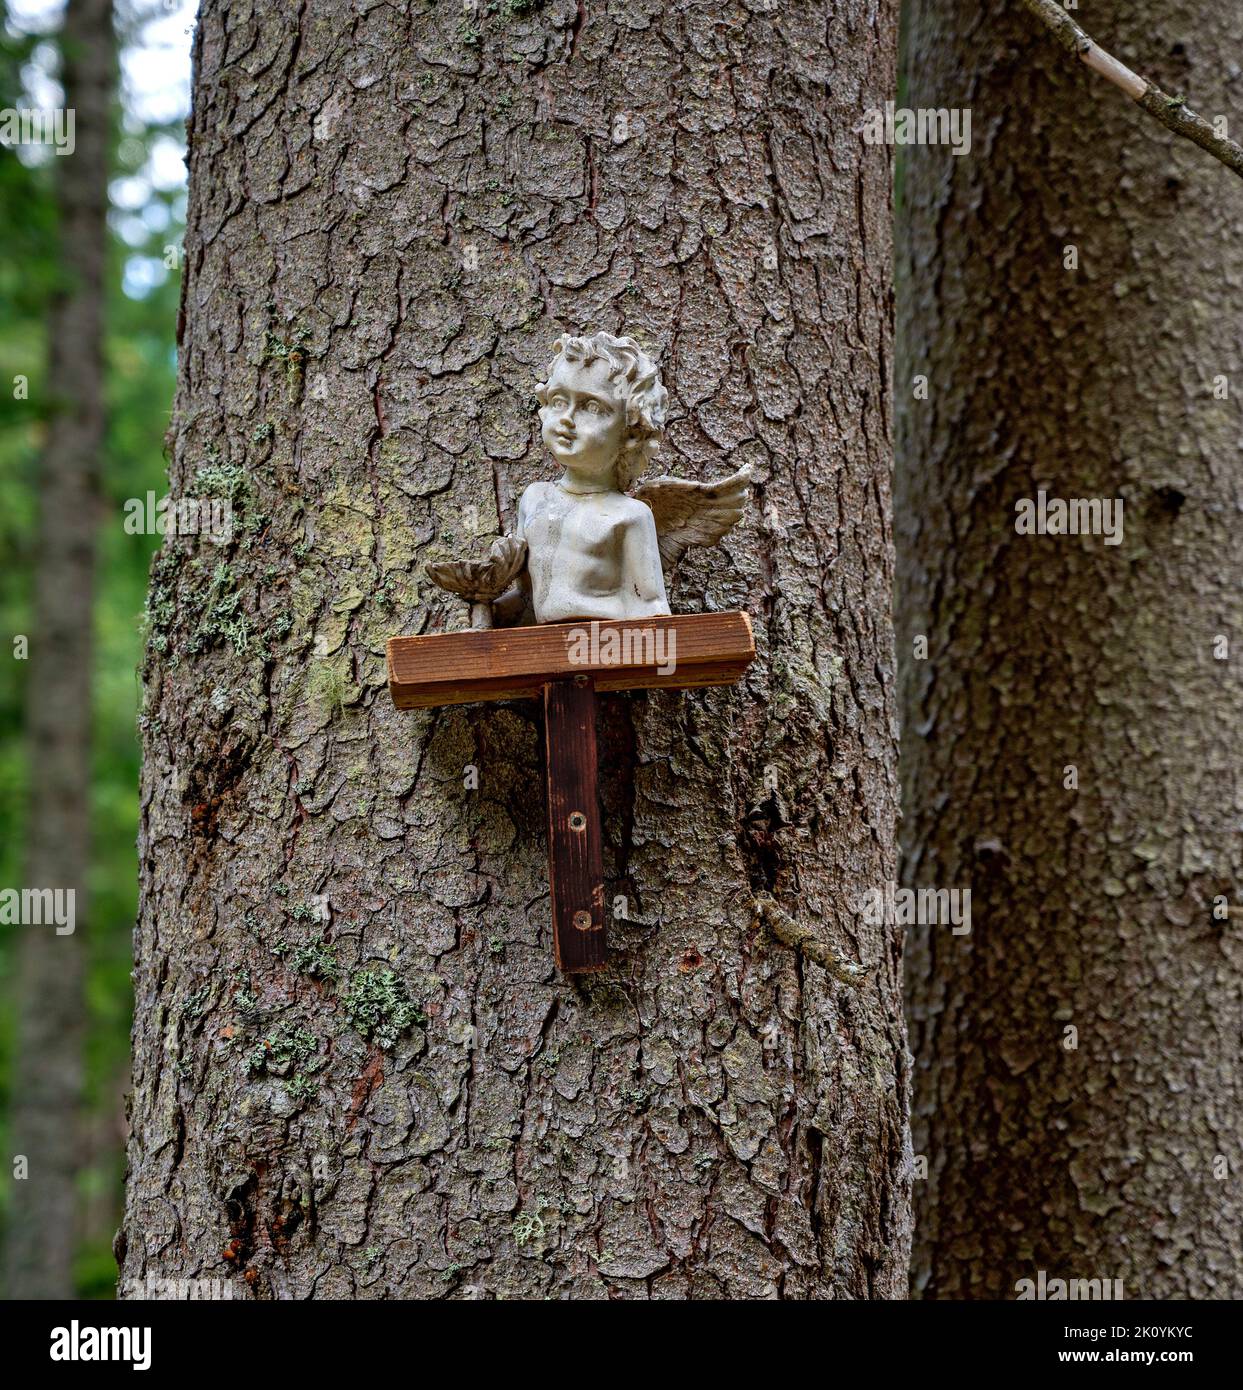 bust of a little ceramic angel fixed on  the trunk of a conifer tree in the forest, Austria Stock Photo